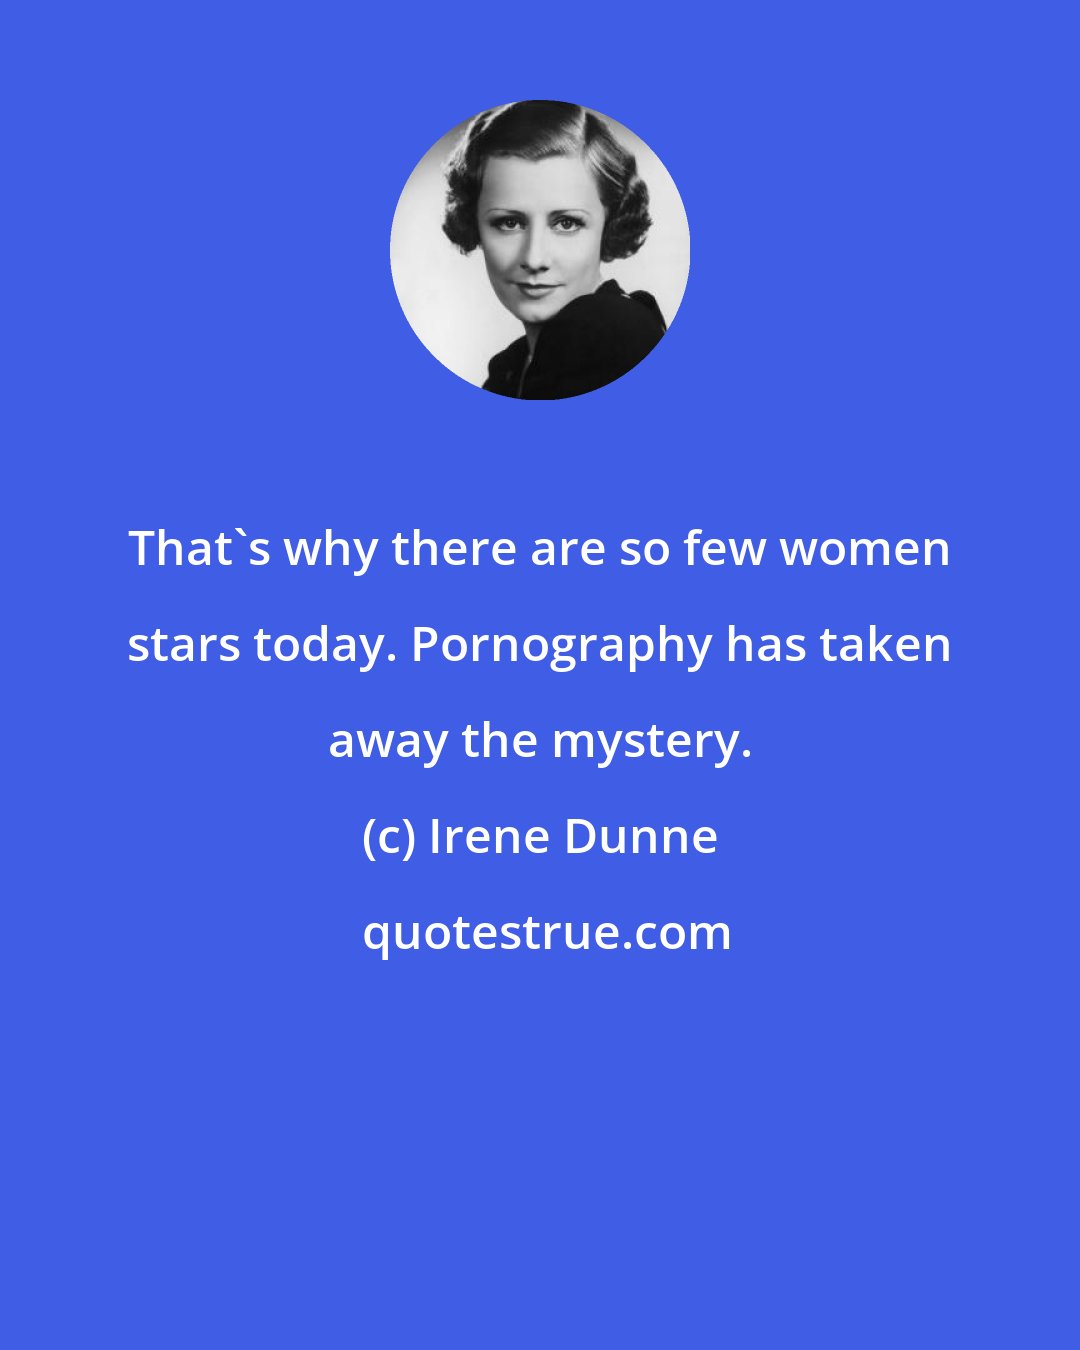 Irene Dunne: That's why there are so few women stars today. Pornography has taken away the mystery.